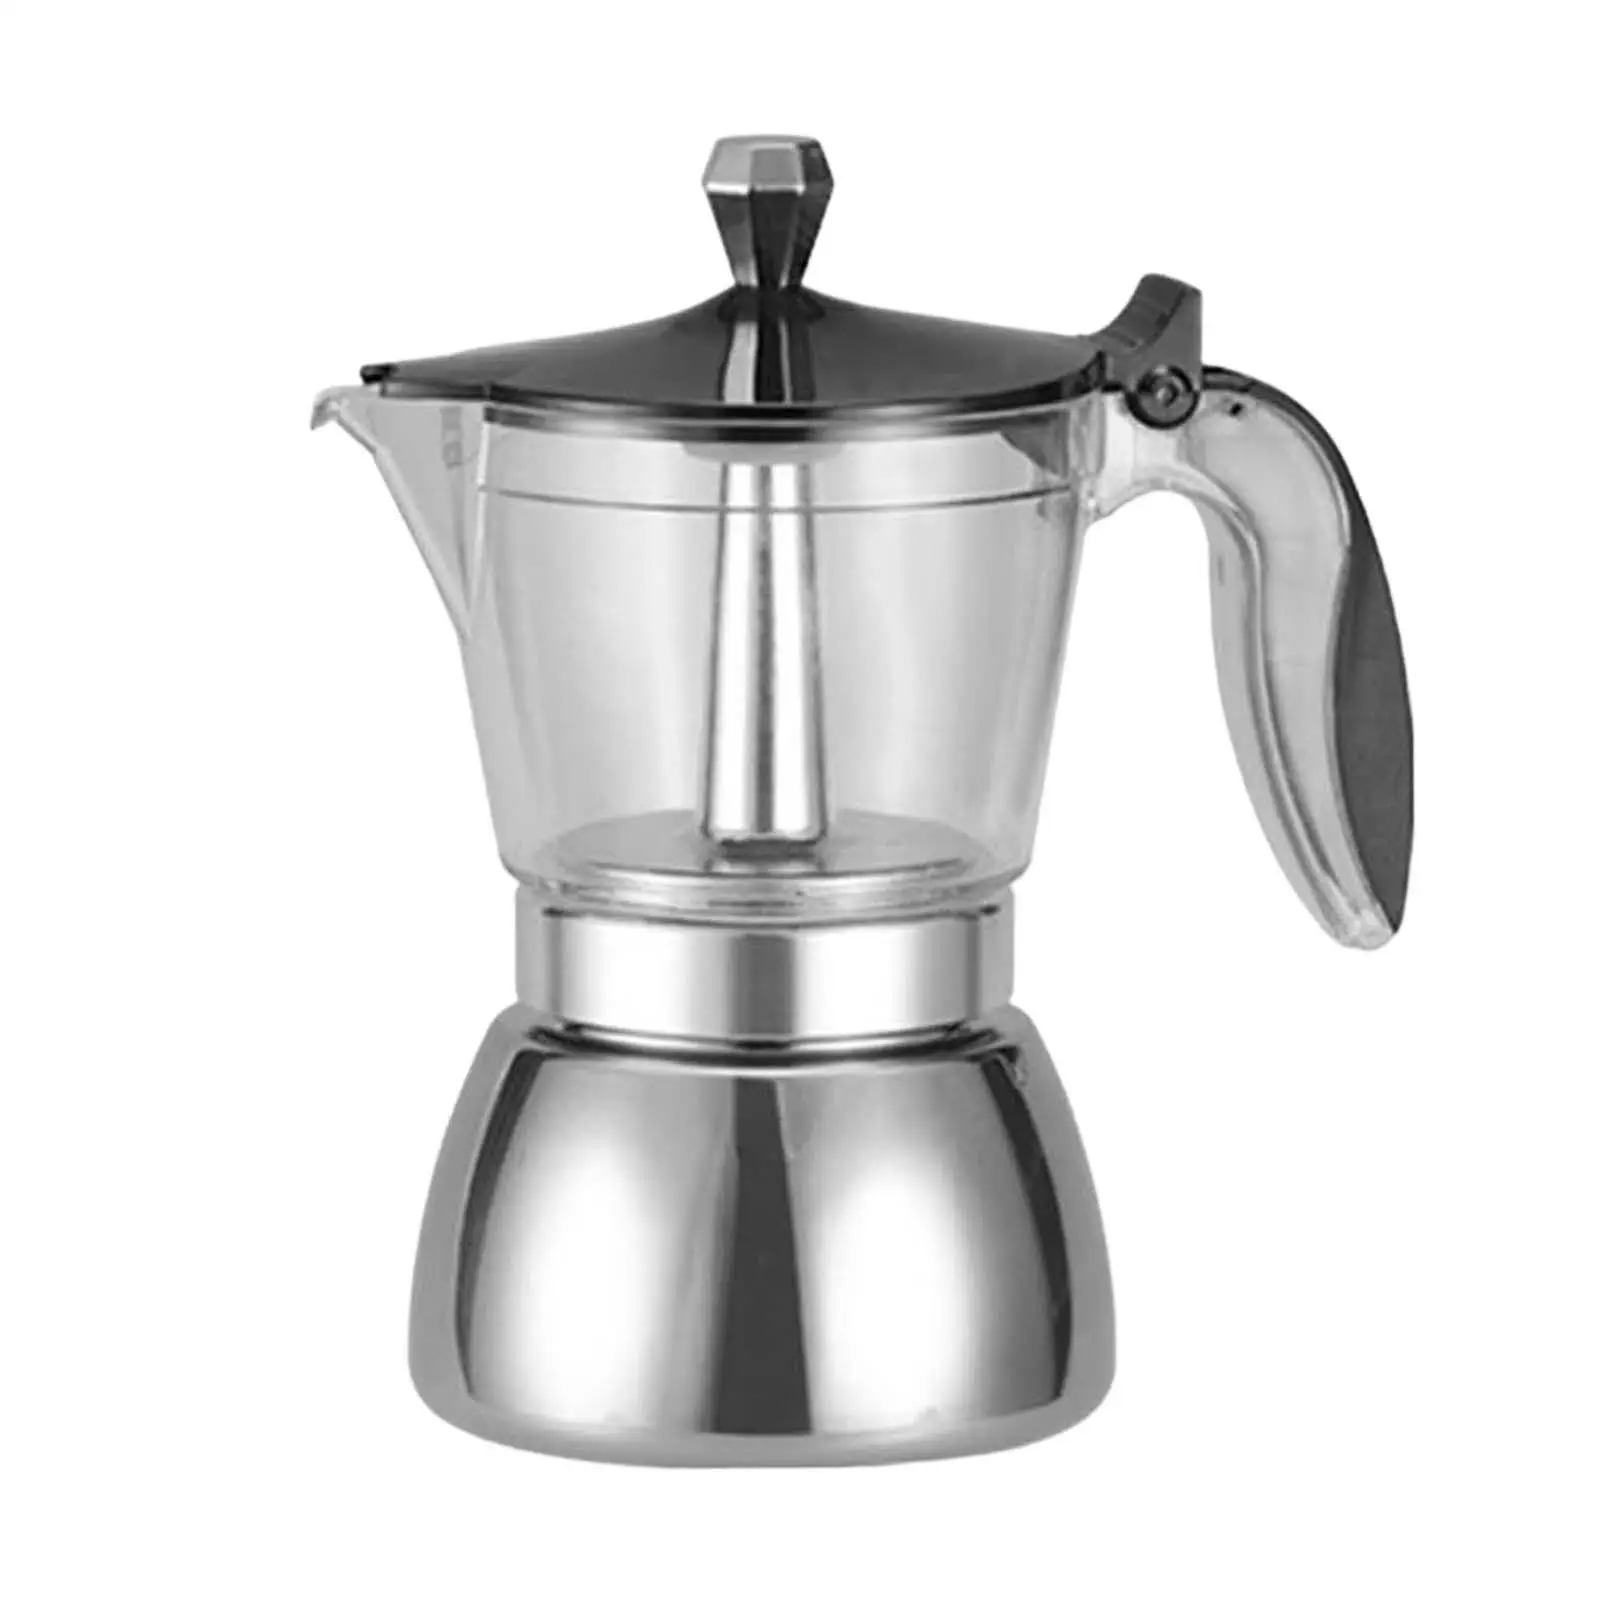 Moka Pot Anti Scald Handle Italian Style Stainless Steel Stovetop Espresso Pot for Barista Accessory Outdoor Camping Home